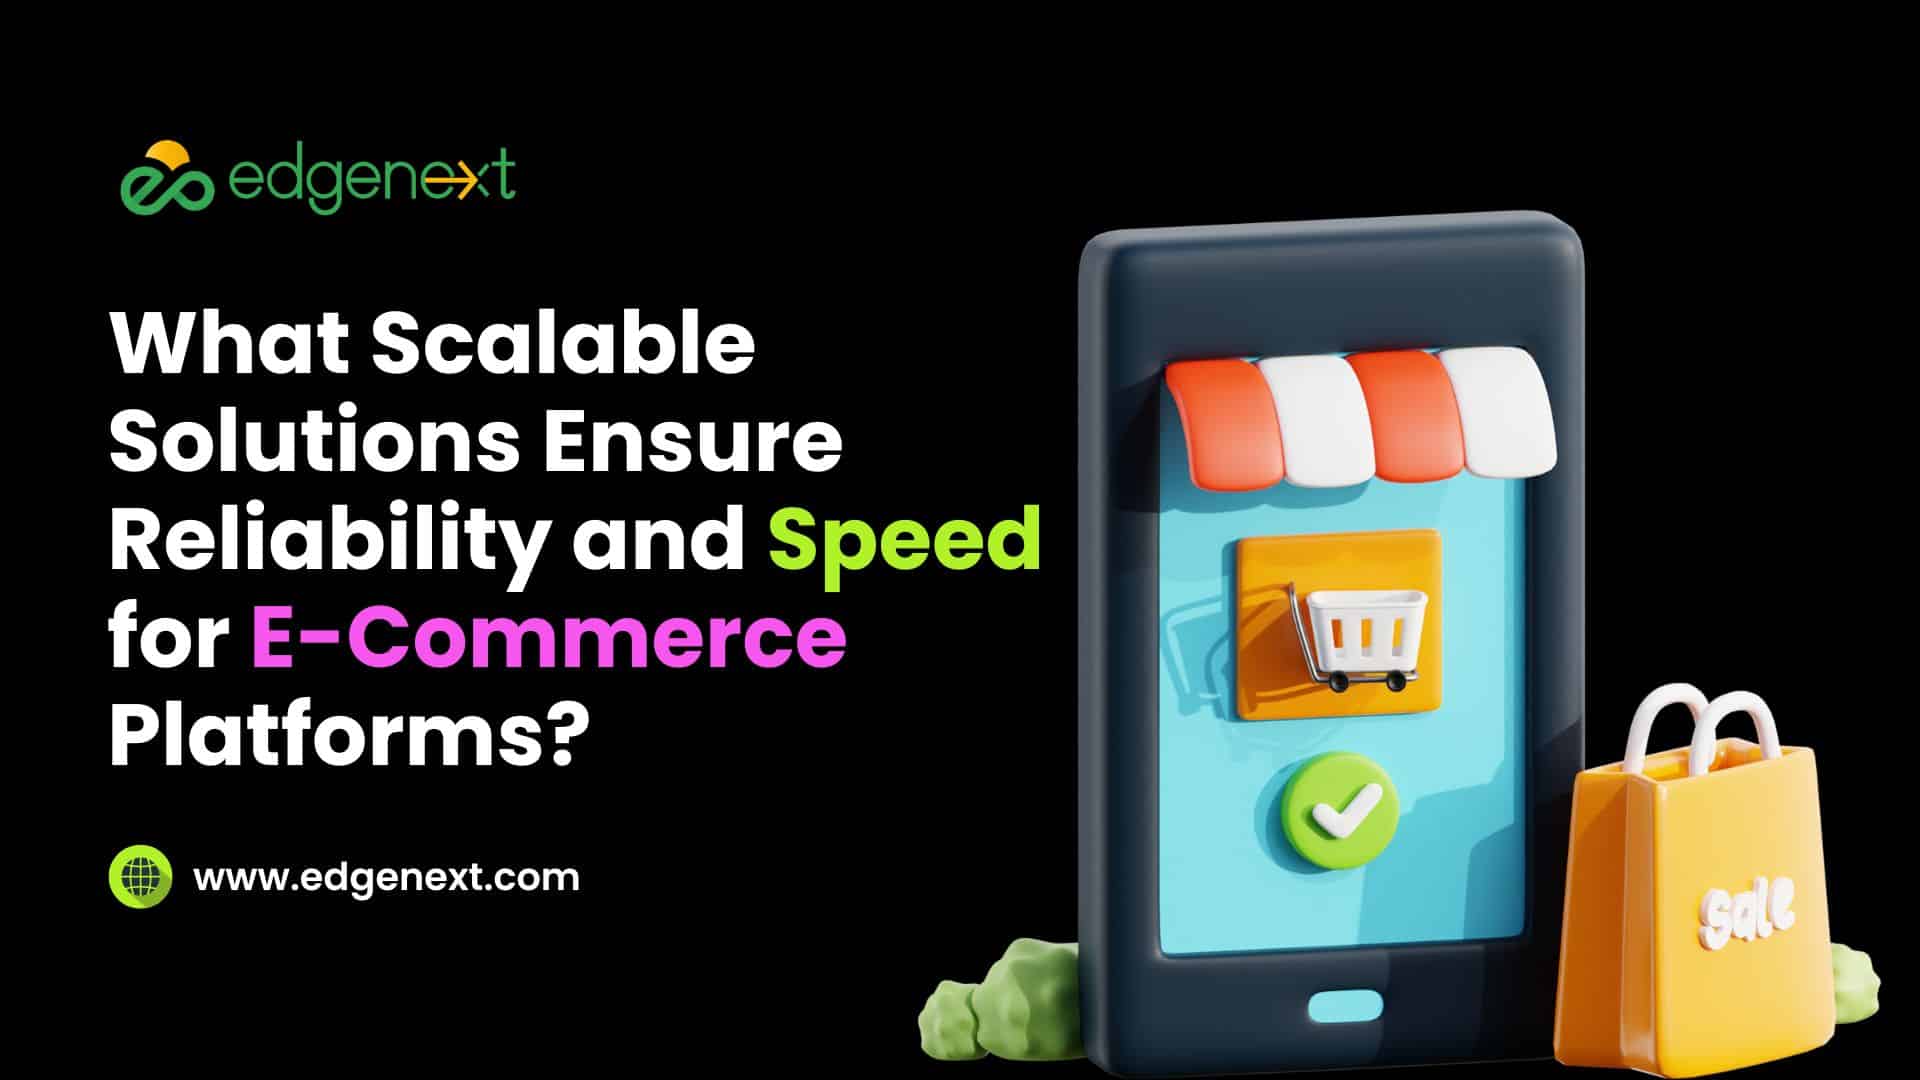 Scalable Solutions Ensure Reliability and Speed for E-Commerce Platforms